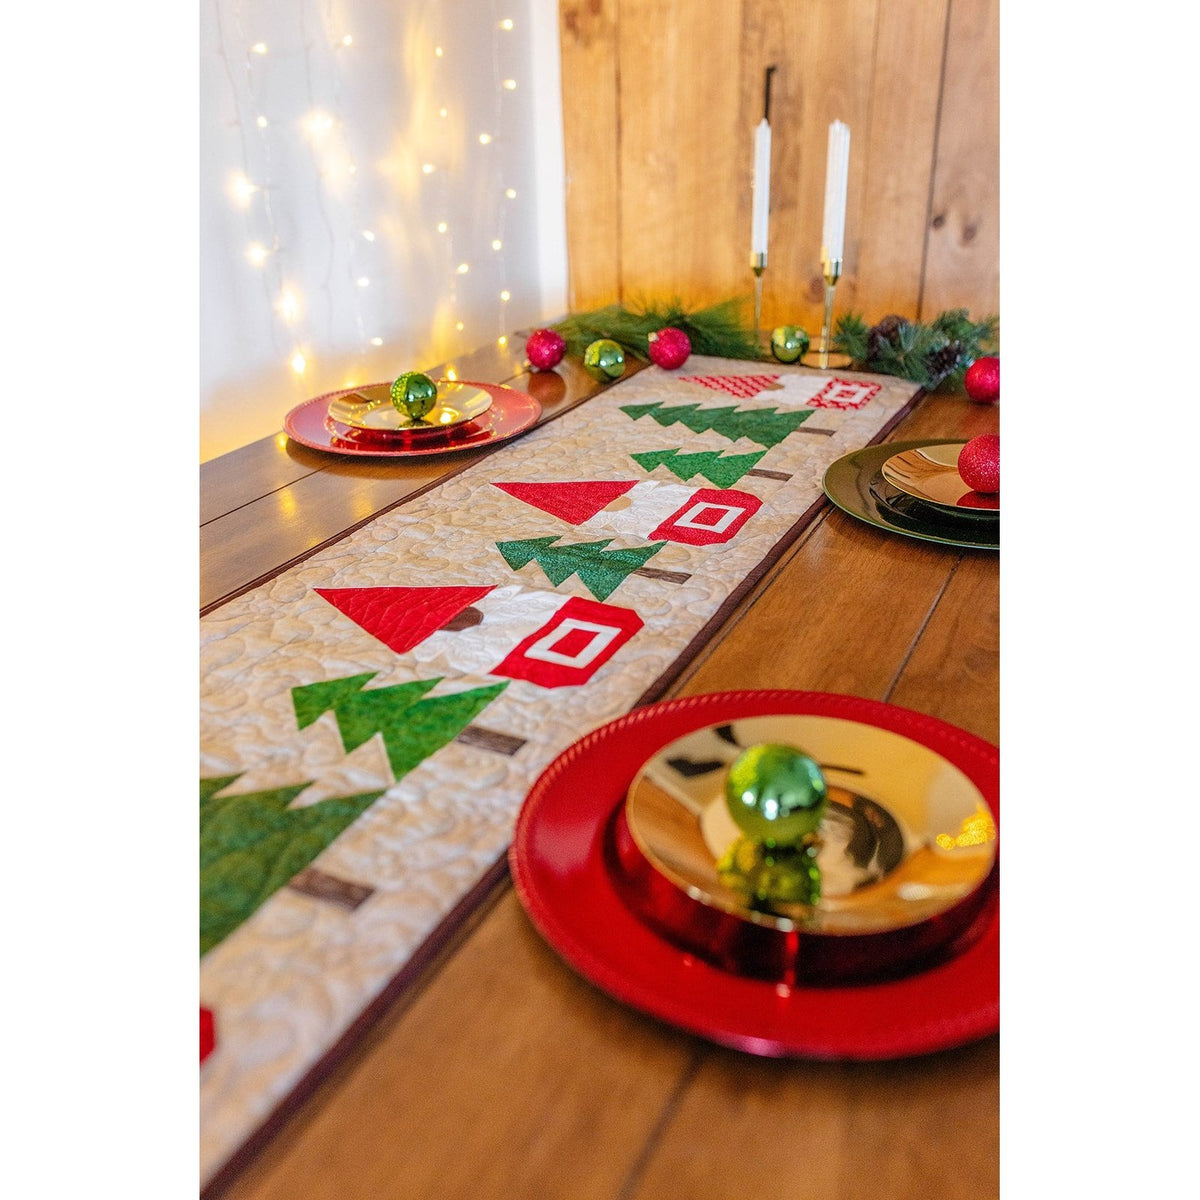 Festive Gnomes & Trees Quilted Table Runner Kit - Pre-Cut, Complete with Fabric, Pattern, & Backing - 16x62 inches